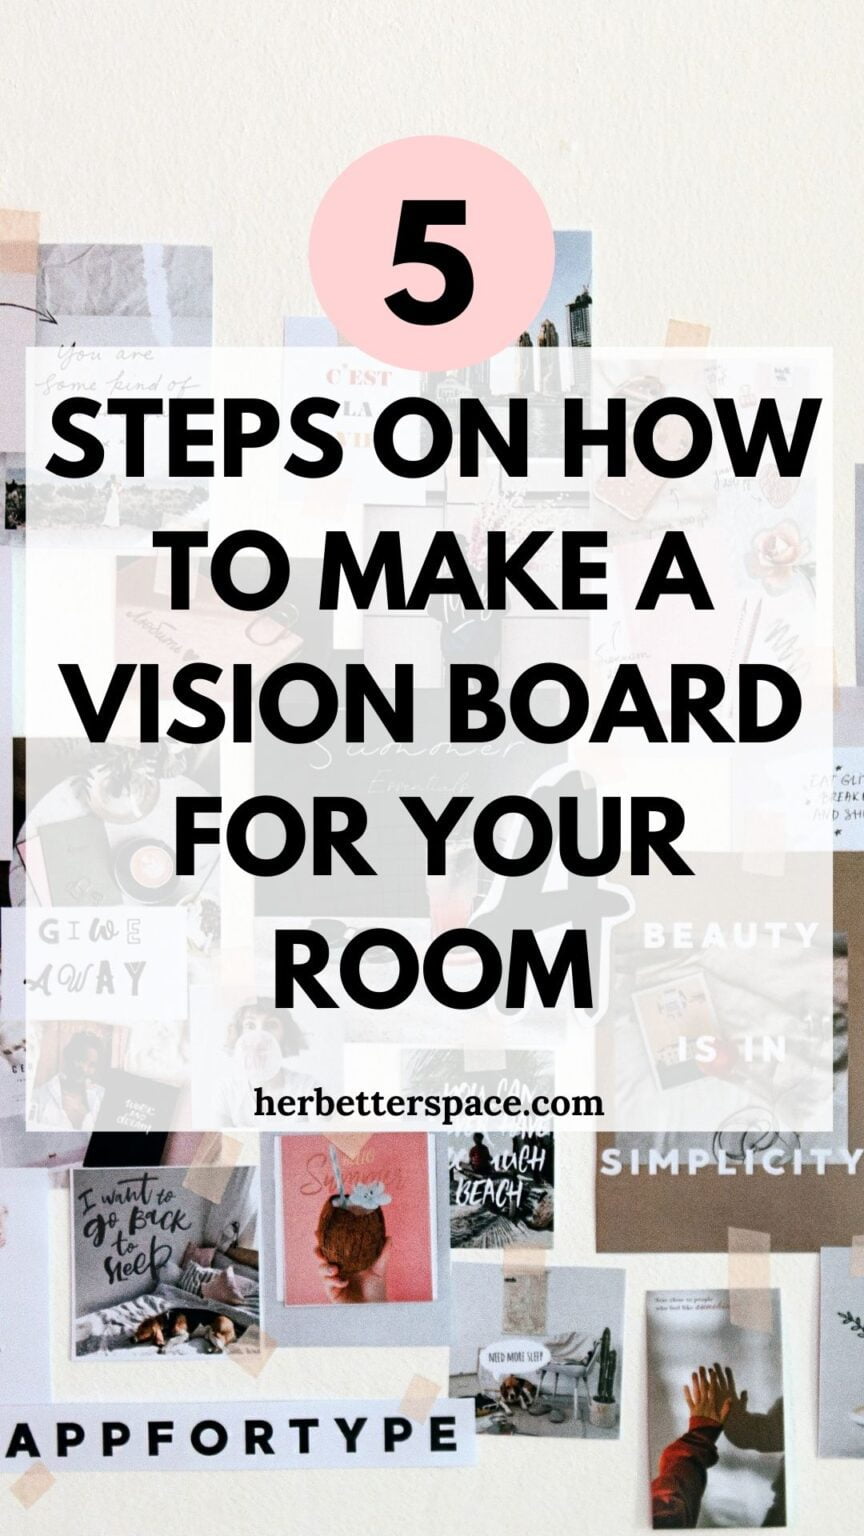 How To Make A Vision Board In 5 Steps - Her Better Space